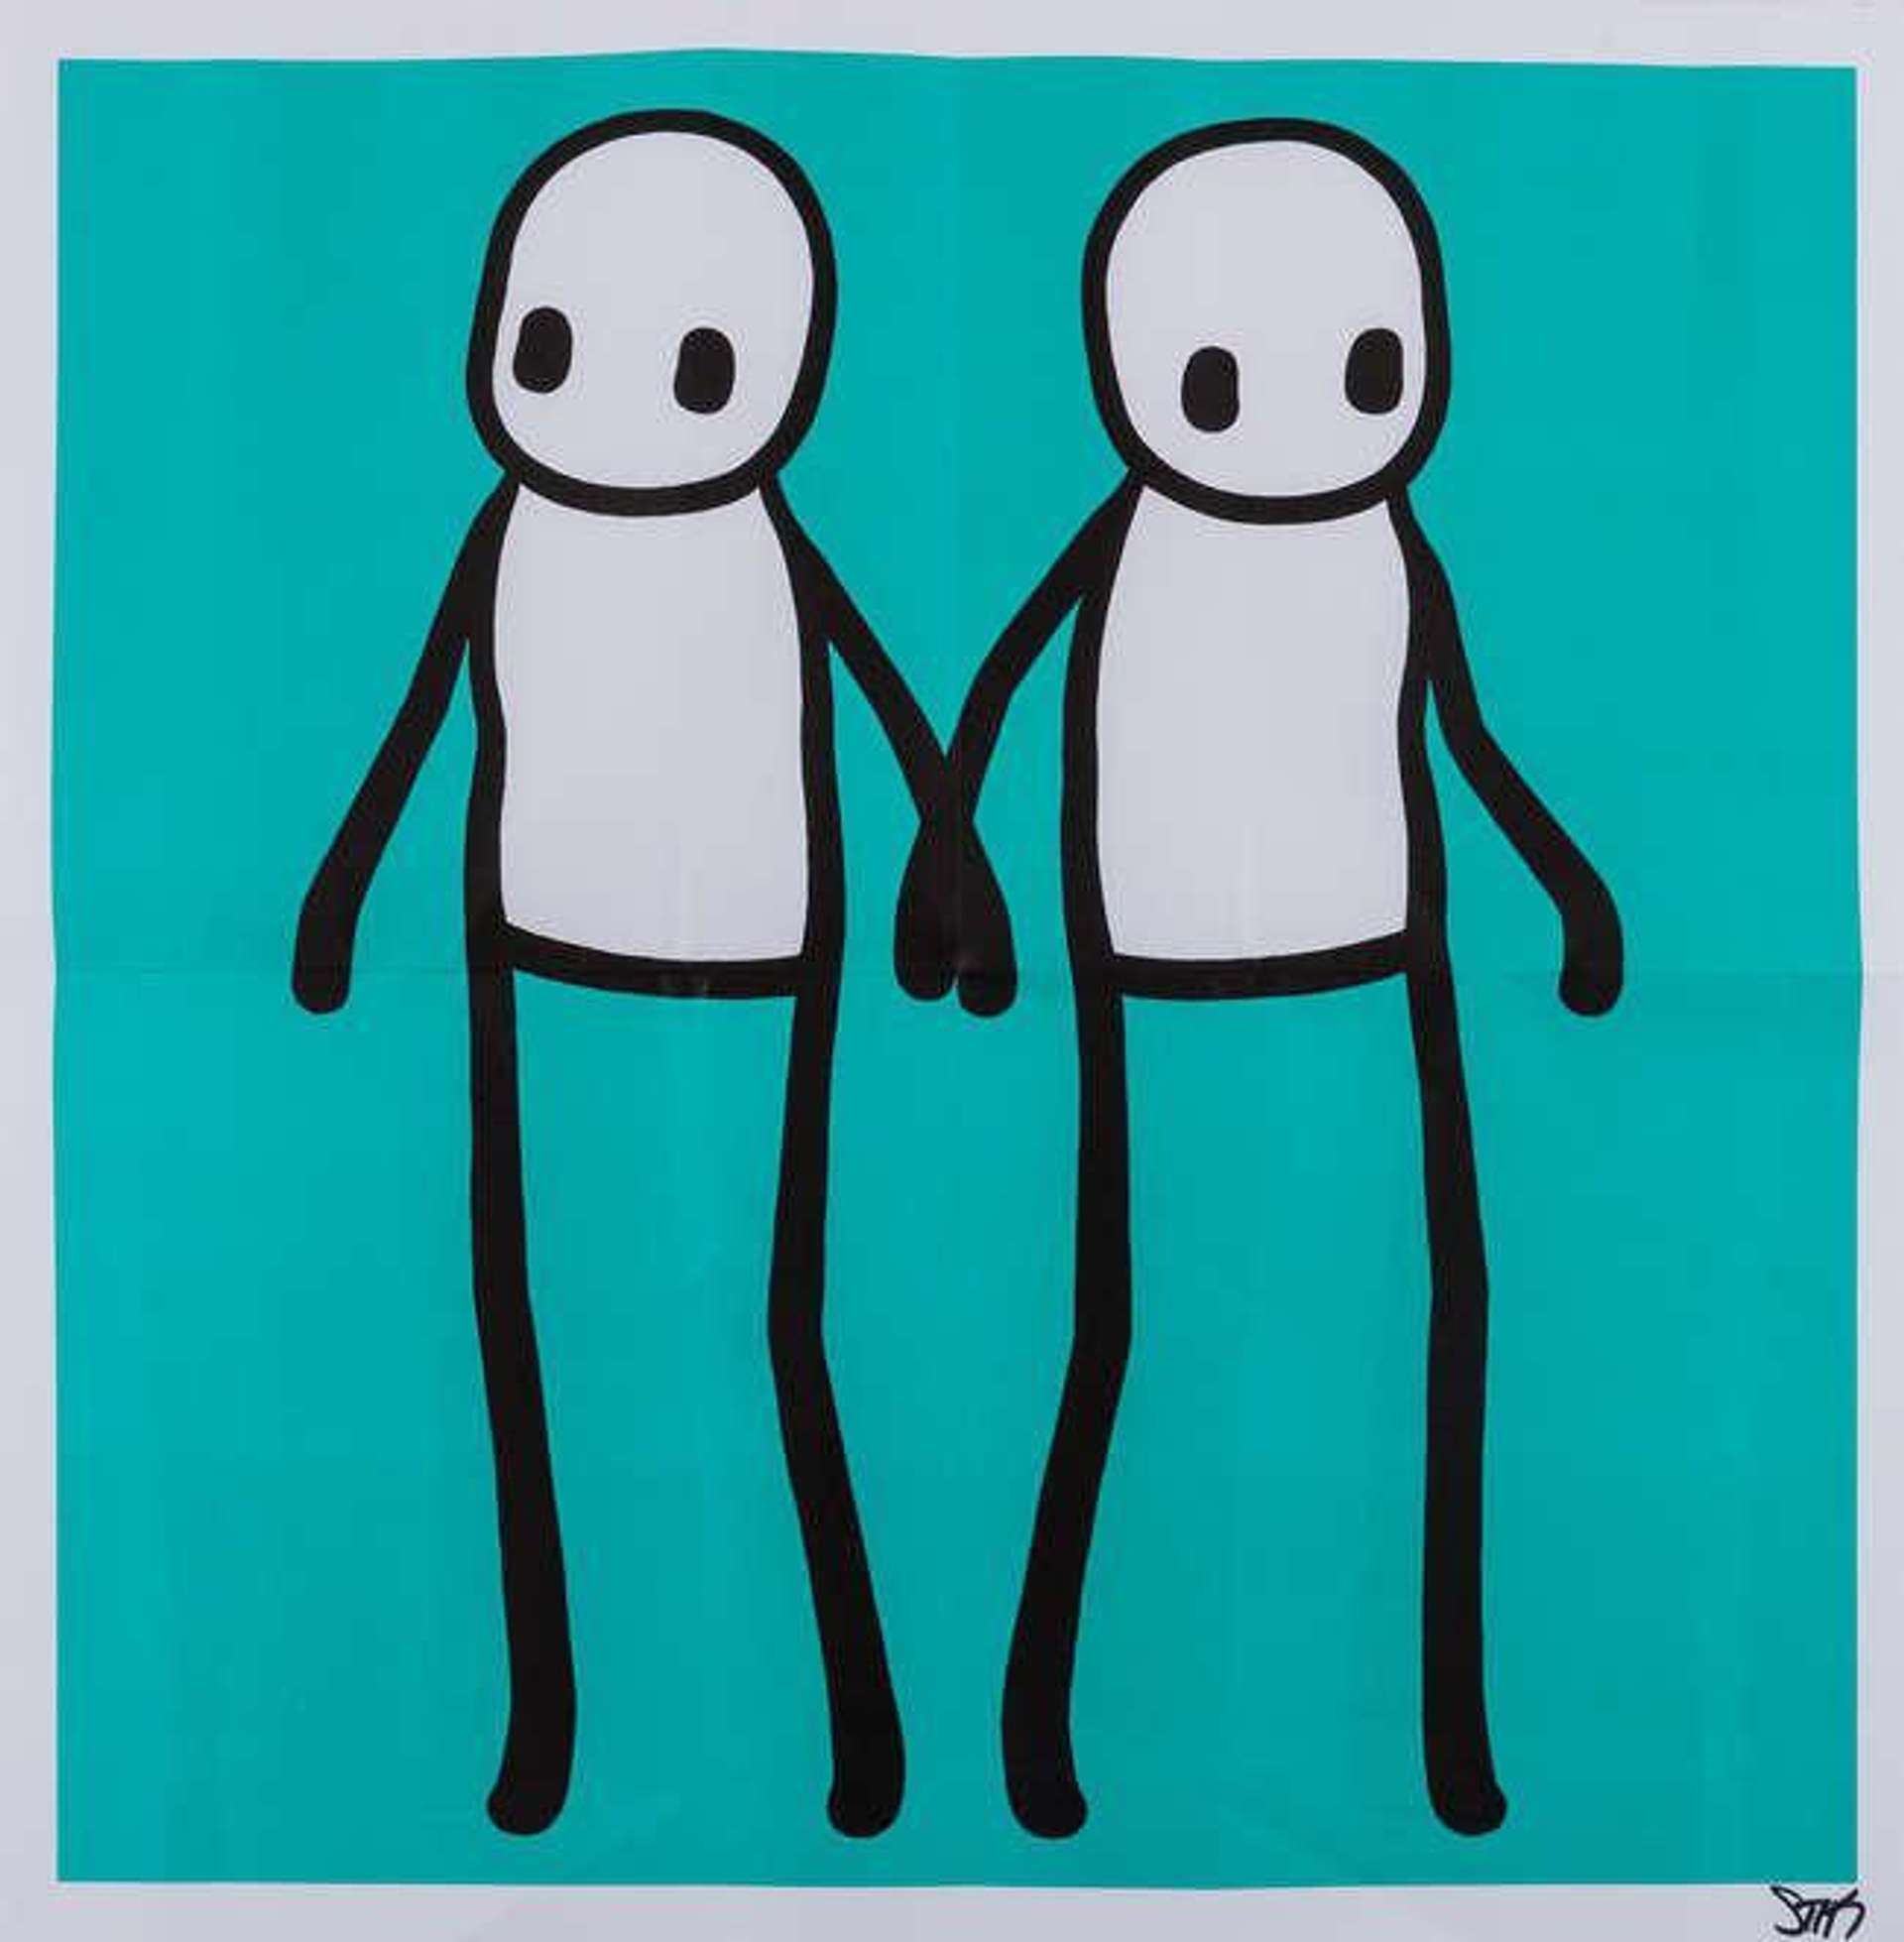 Holding Hands (Teal) by Stik